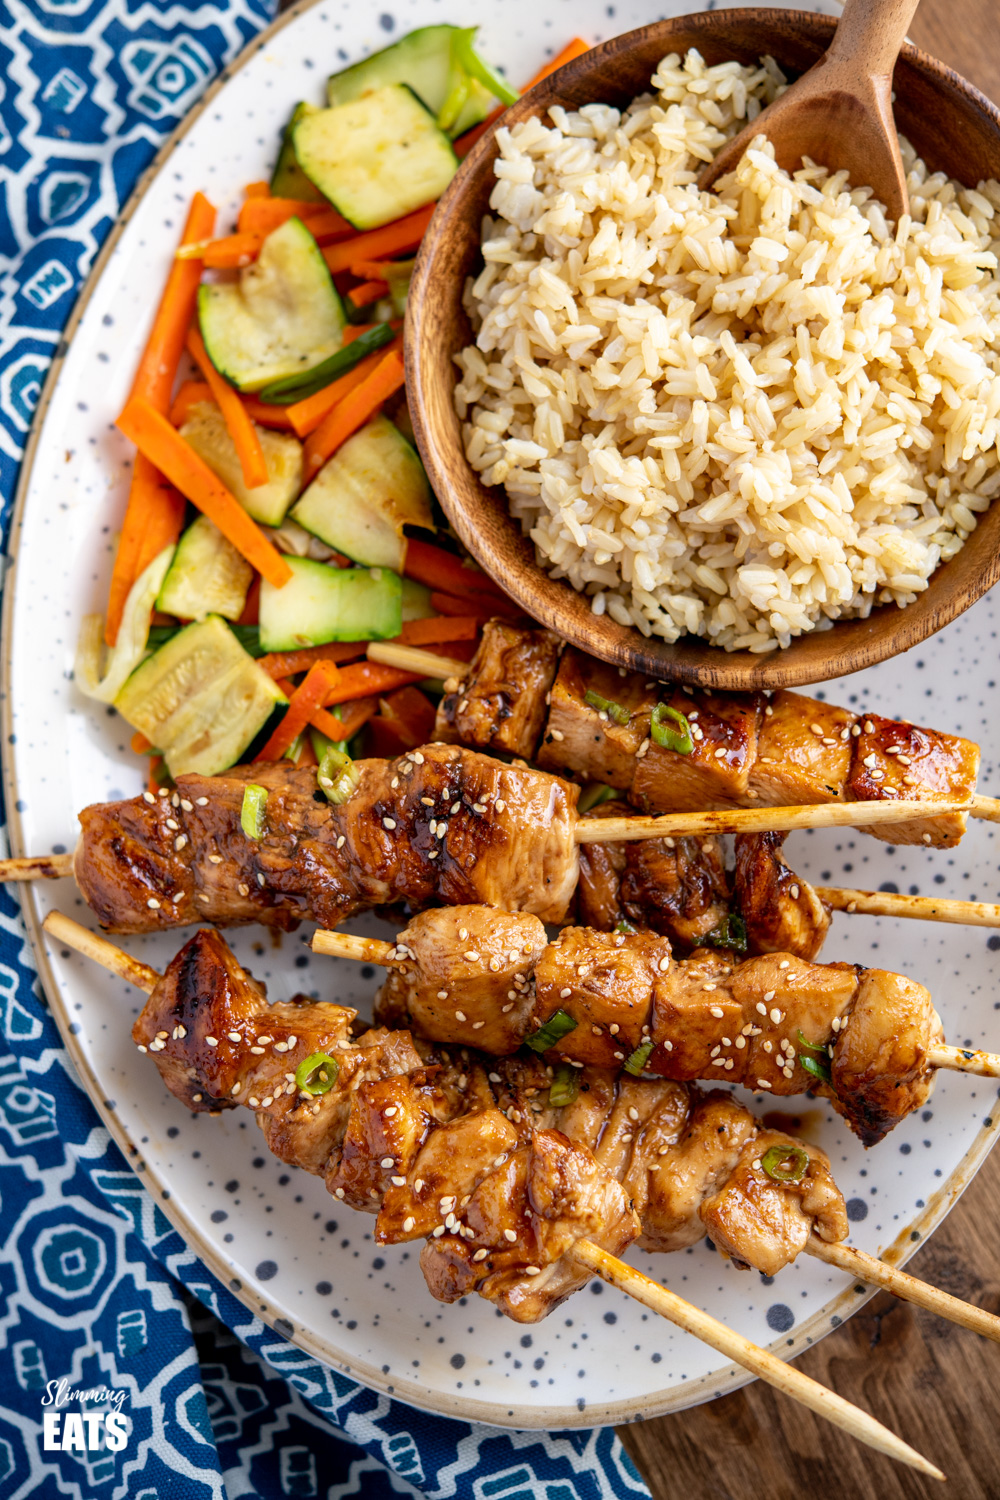 Yakitori Chicken Skewers on speckled plate with a bamboo bowl of brown rice and side fo sesame vegetables